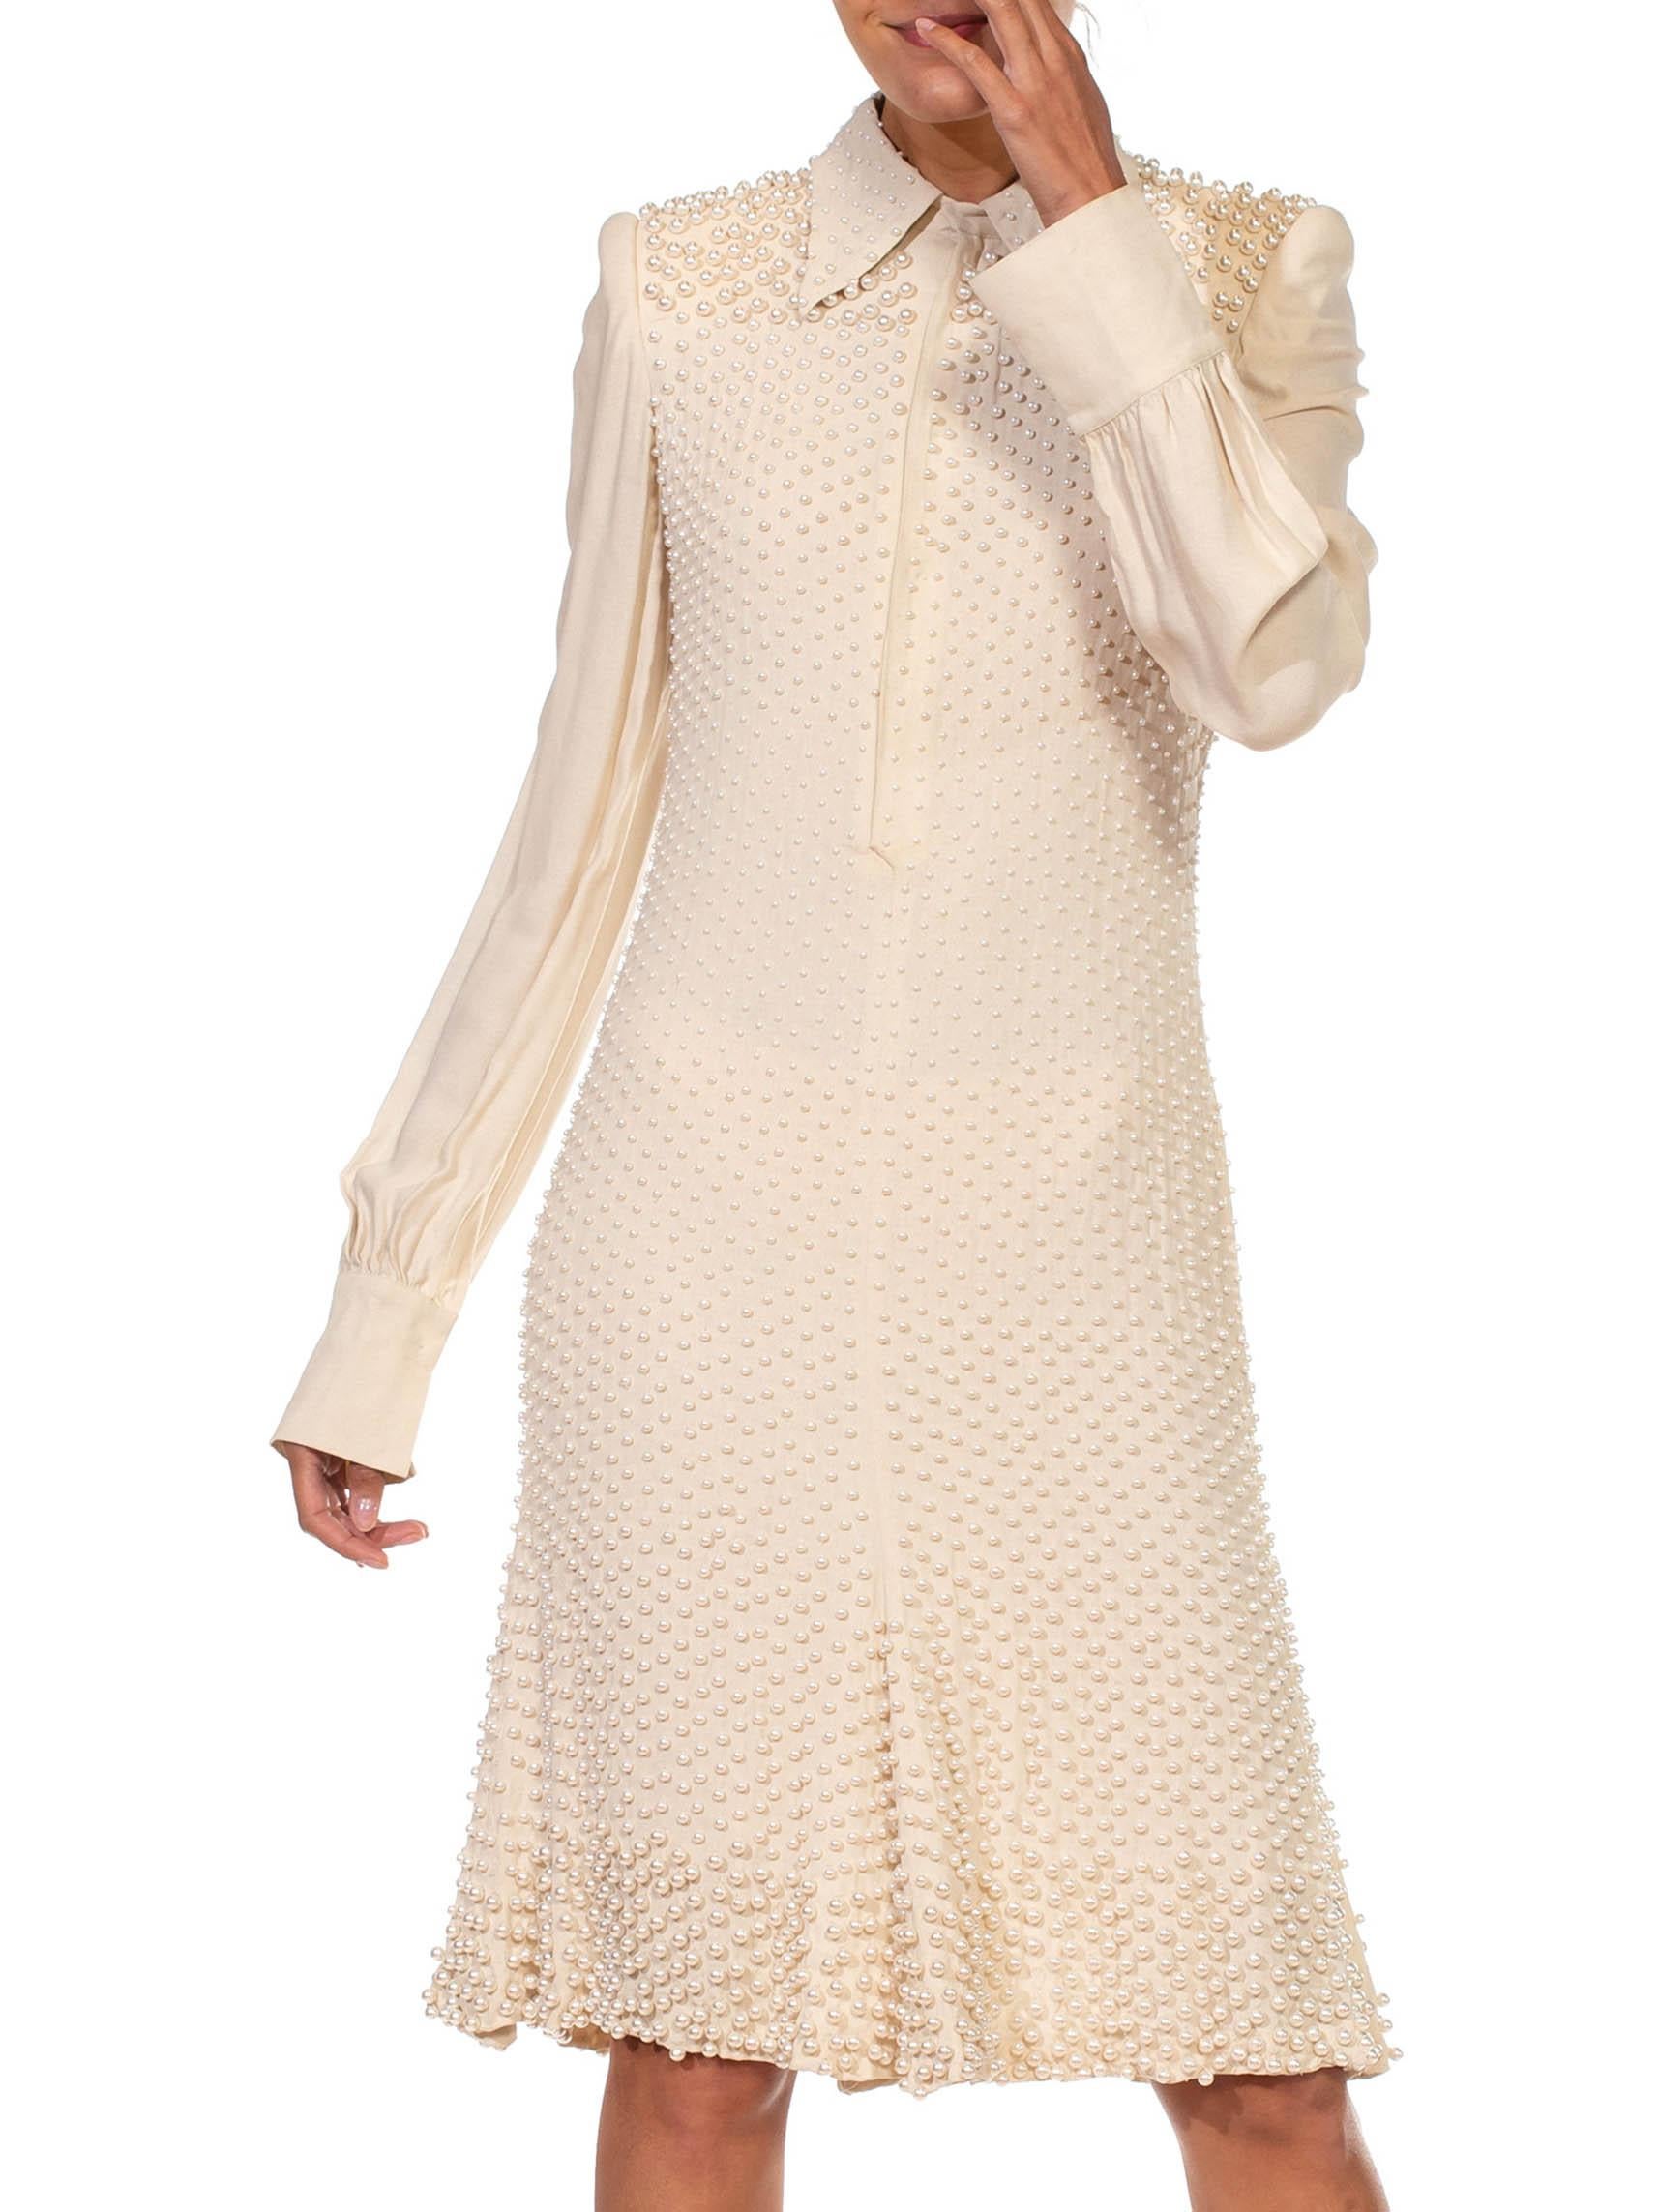 2000S JEAN PAUL GAULTIER Cream Silk Long Sleeved Cocktail Dress Covered In Pear For Sale 3